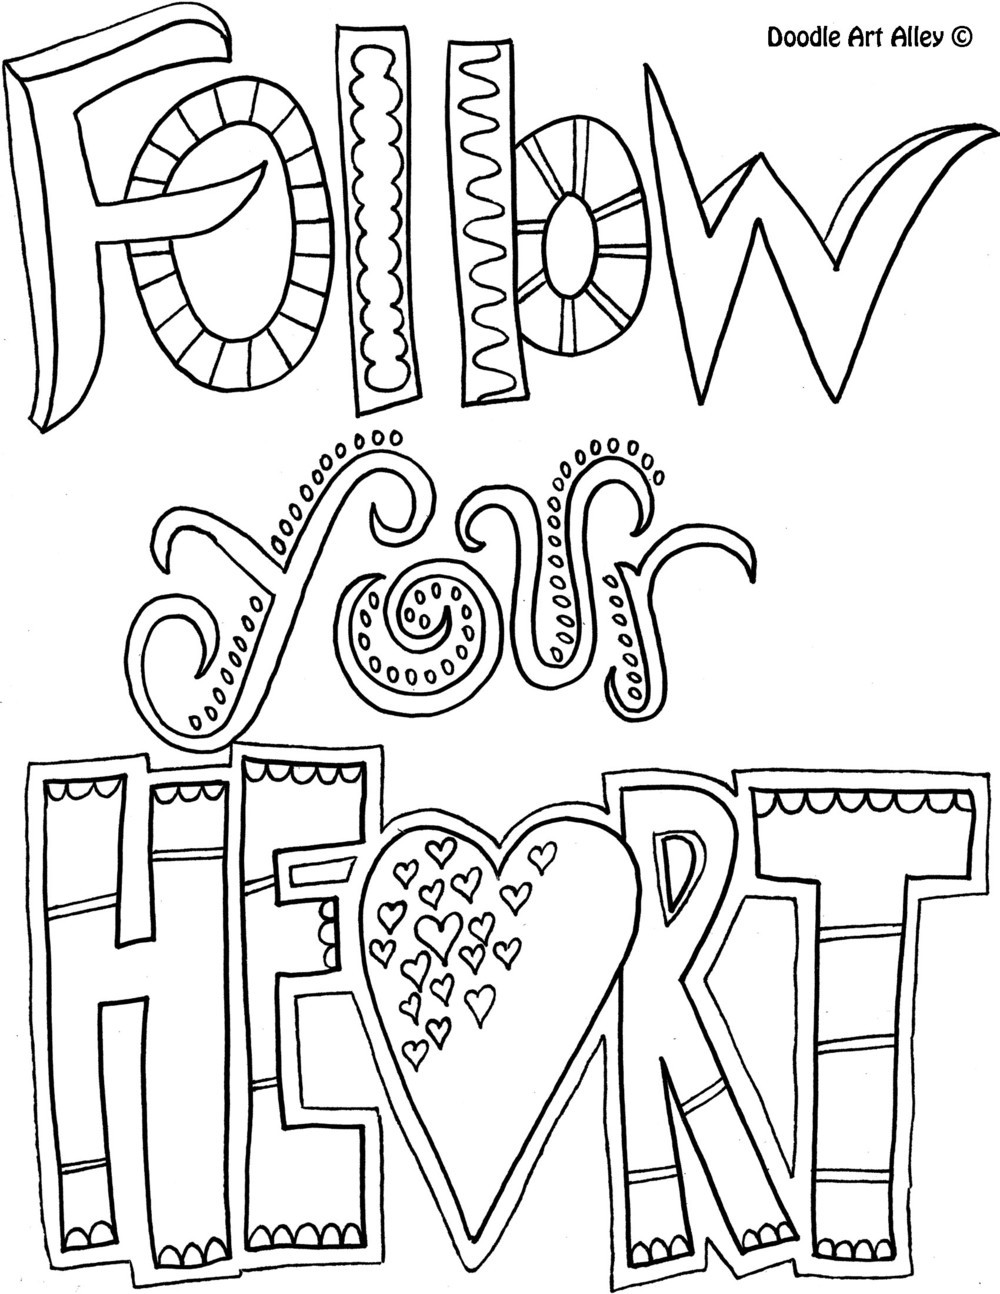 Inspirational Coloring Pages For Kids
 Be e a Coloring book Enthusiast with Doodle Art Alley